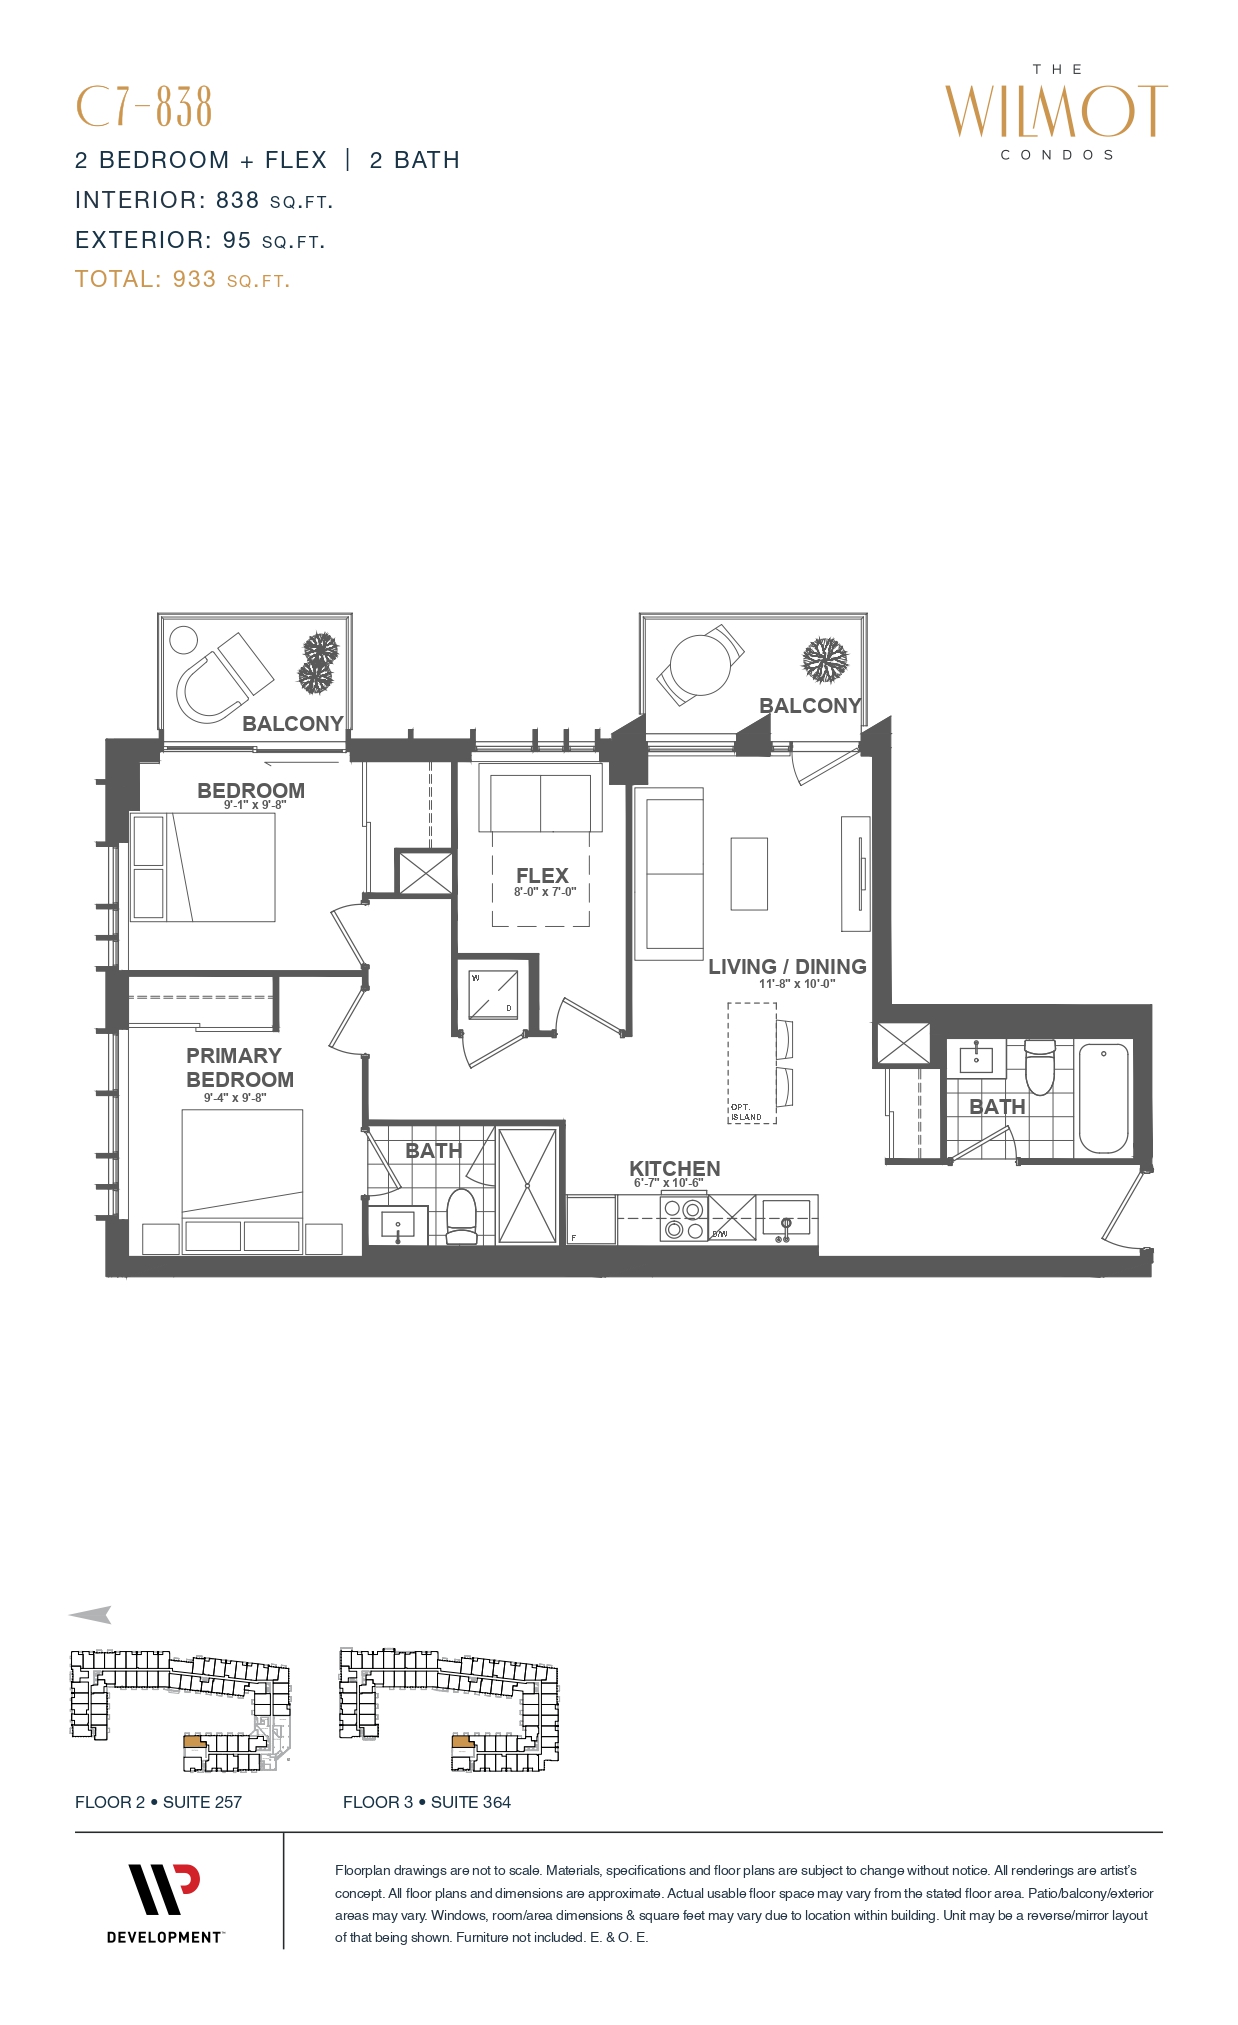  Floor Plan of The Wilmot Condos with undefined beds